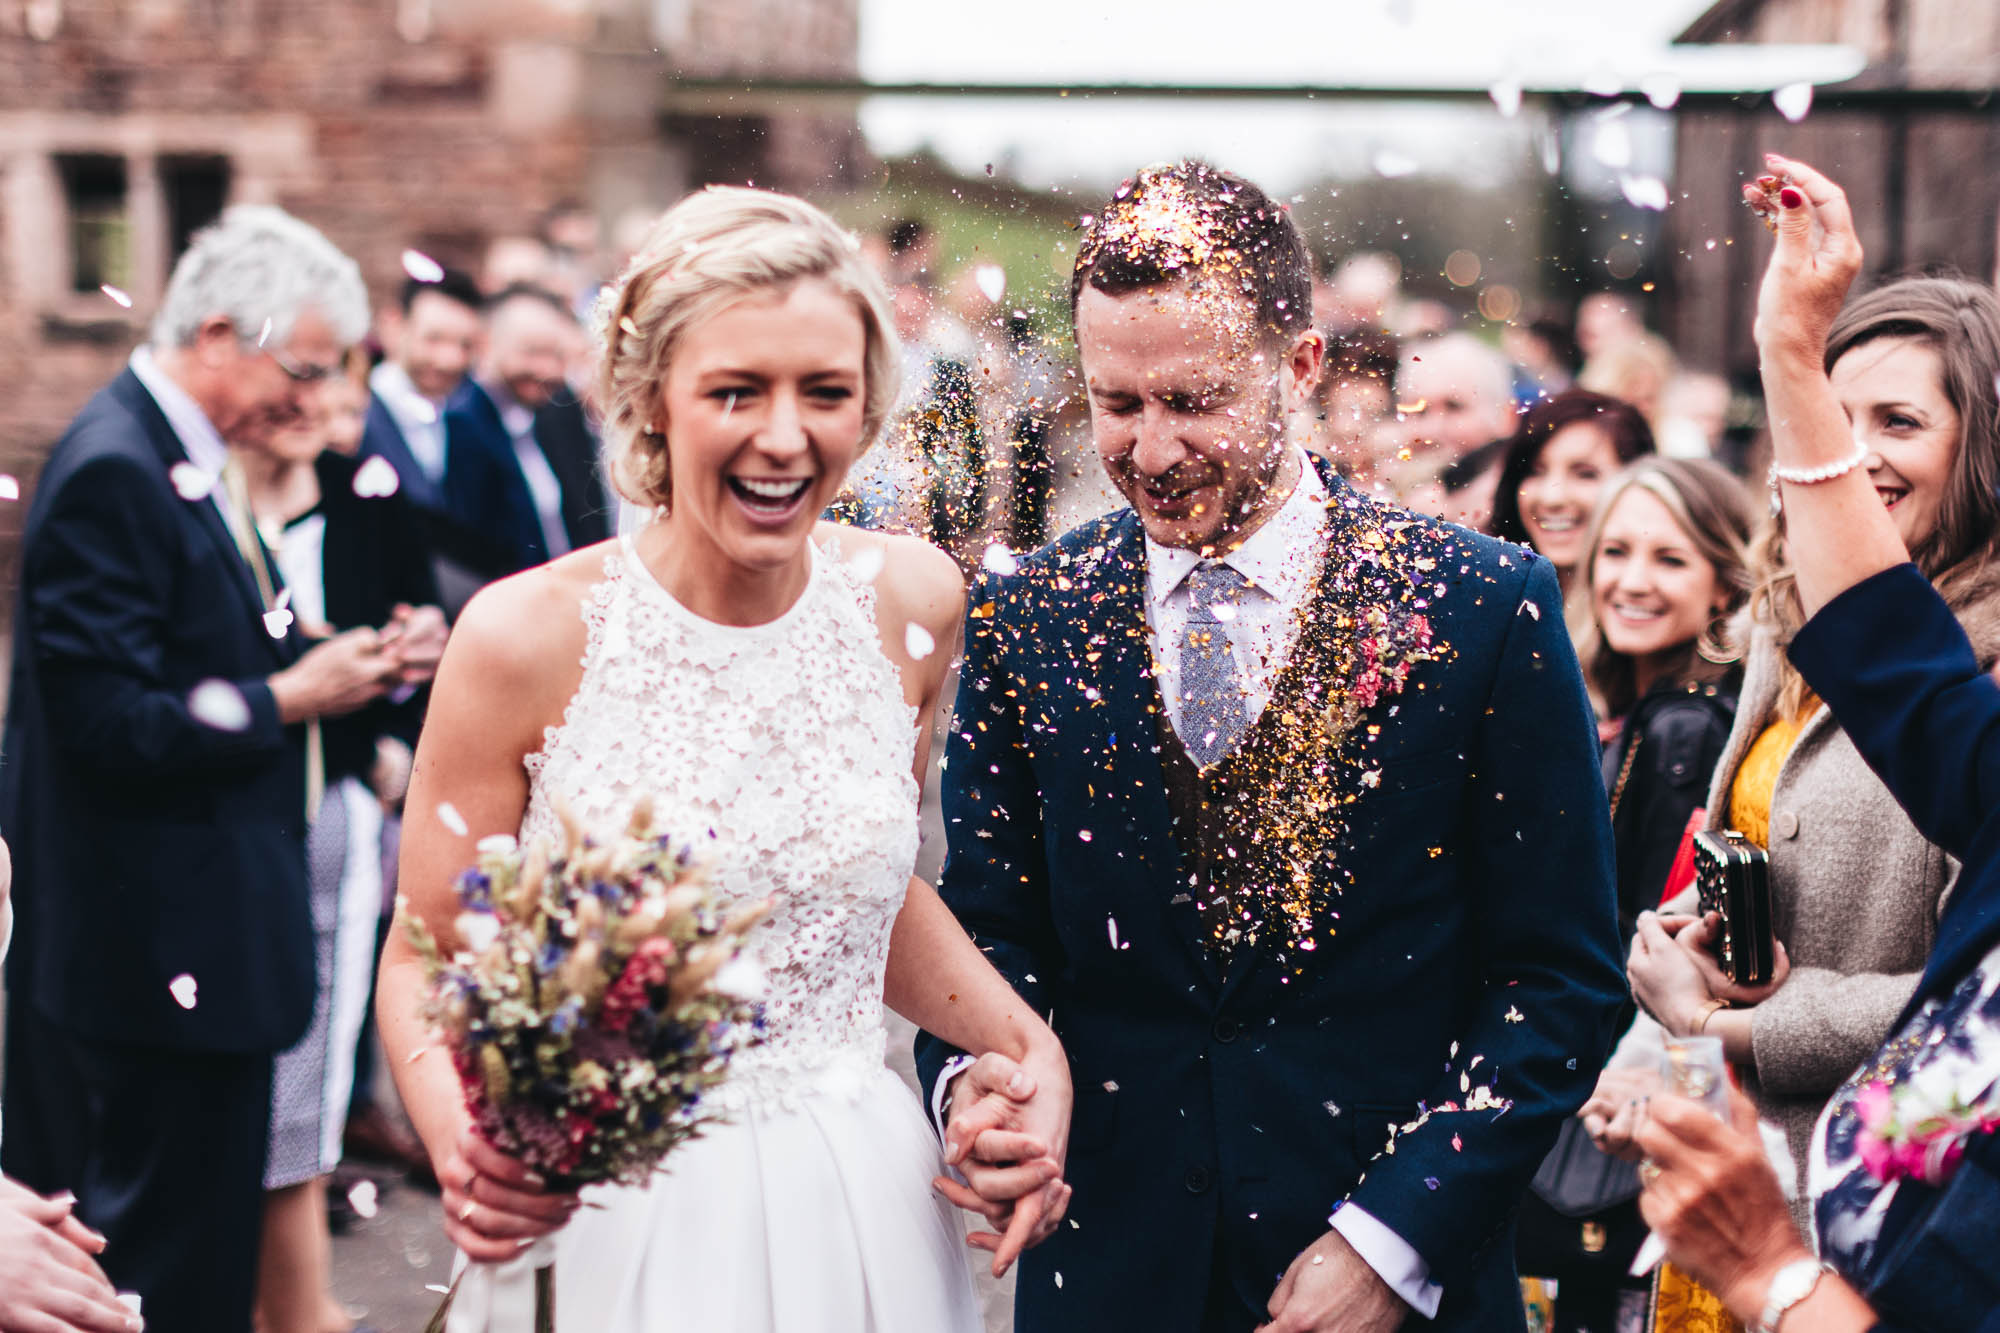 Groom get covered in glitter as wedding guests throw confetti at the happy couple